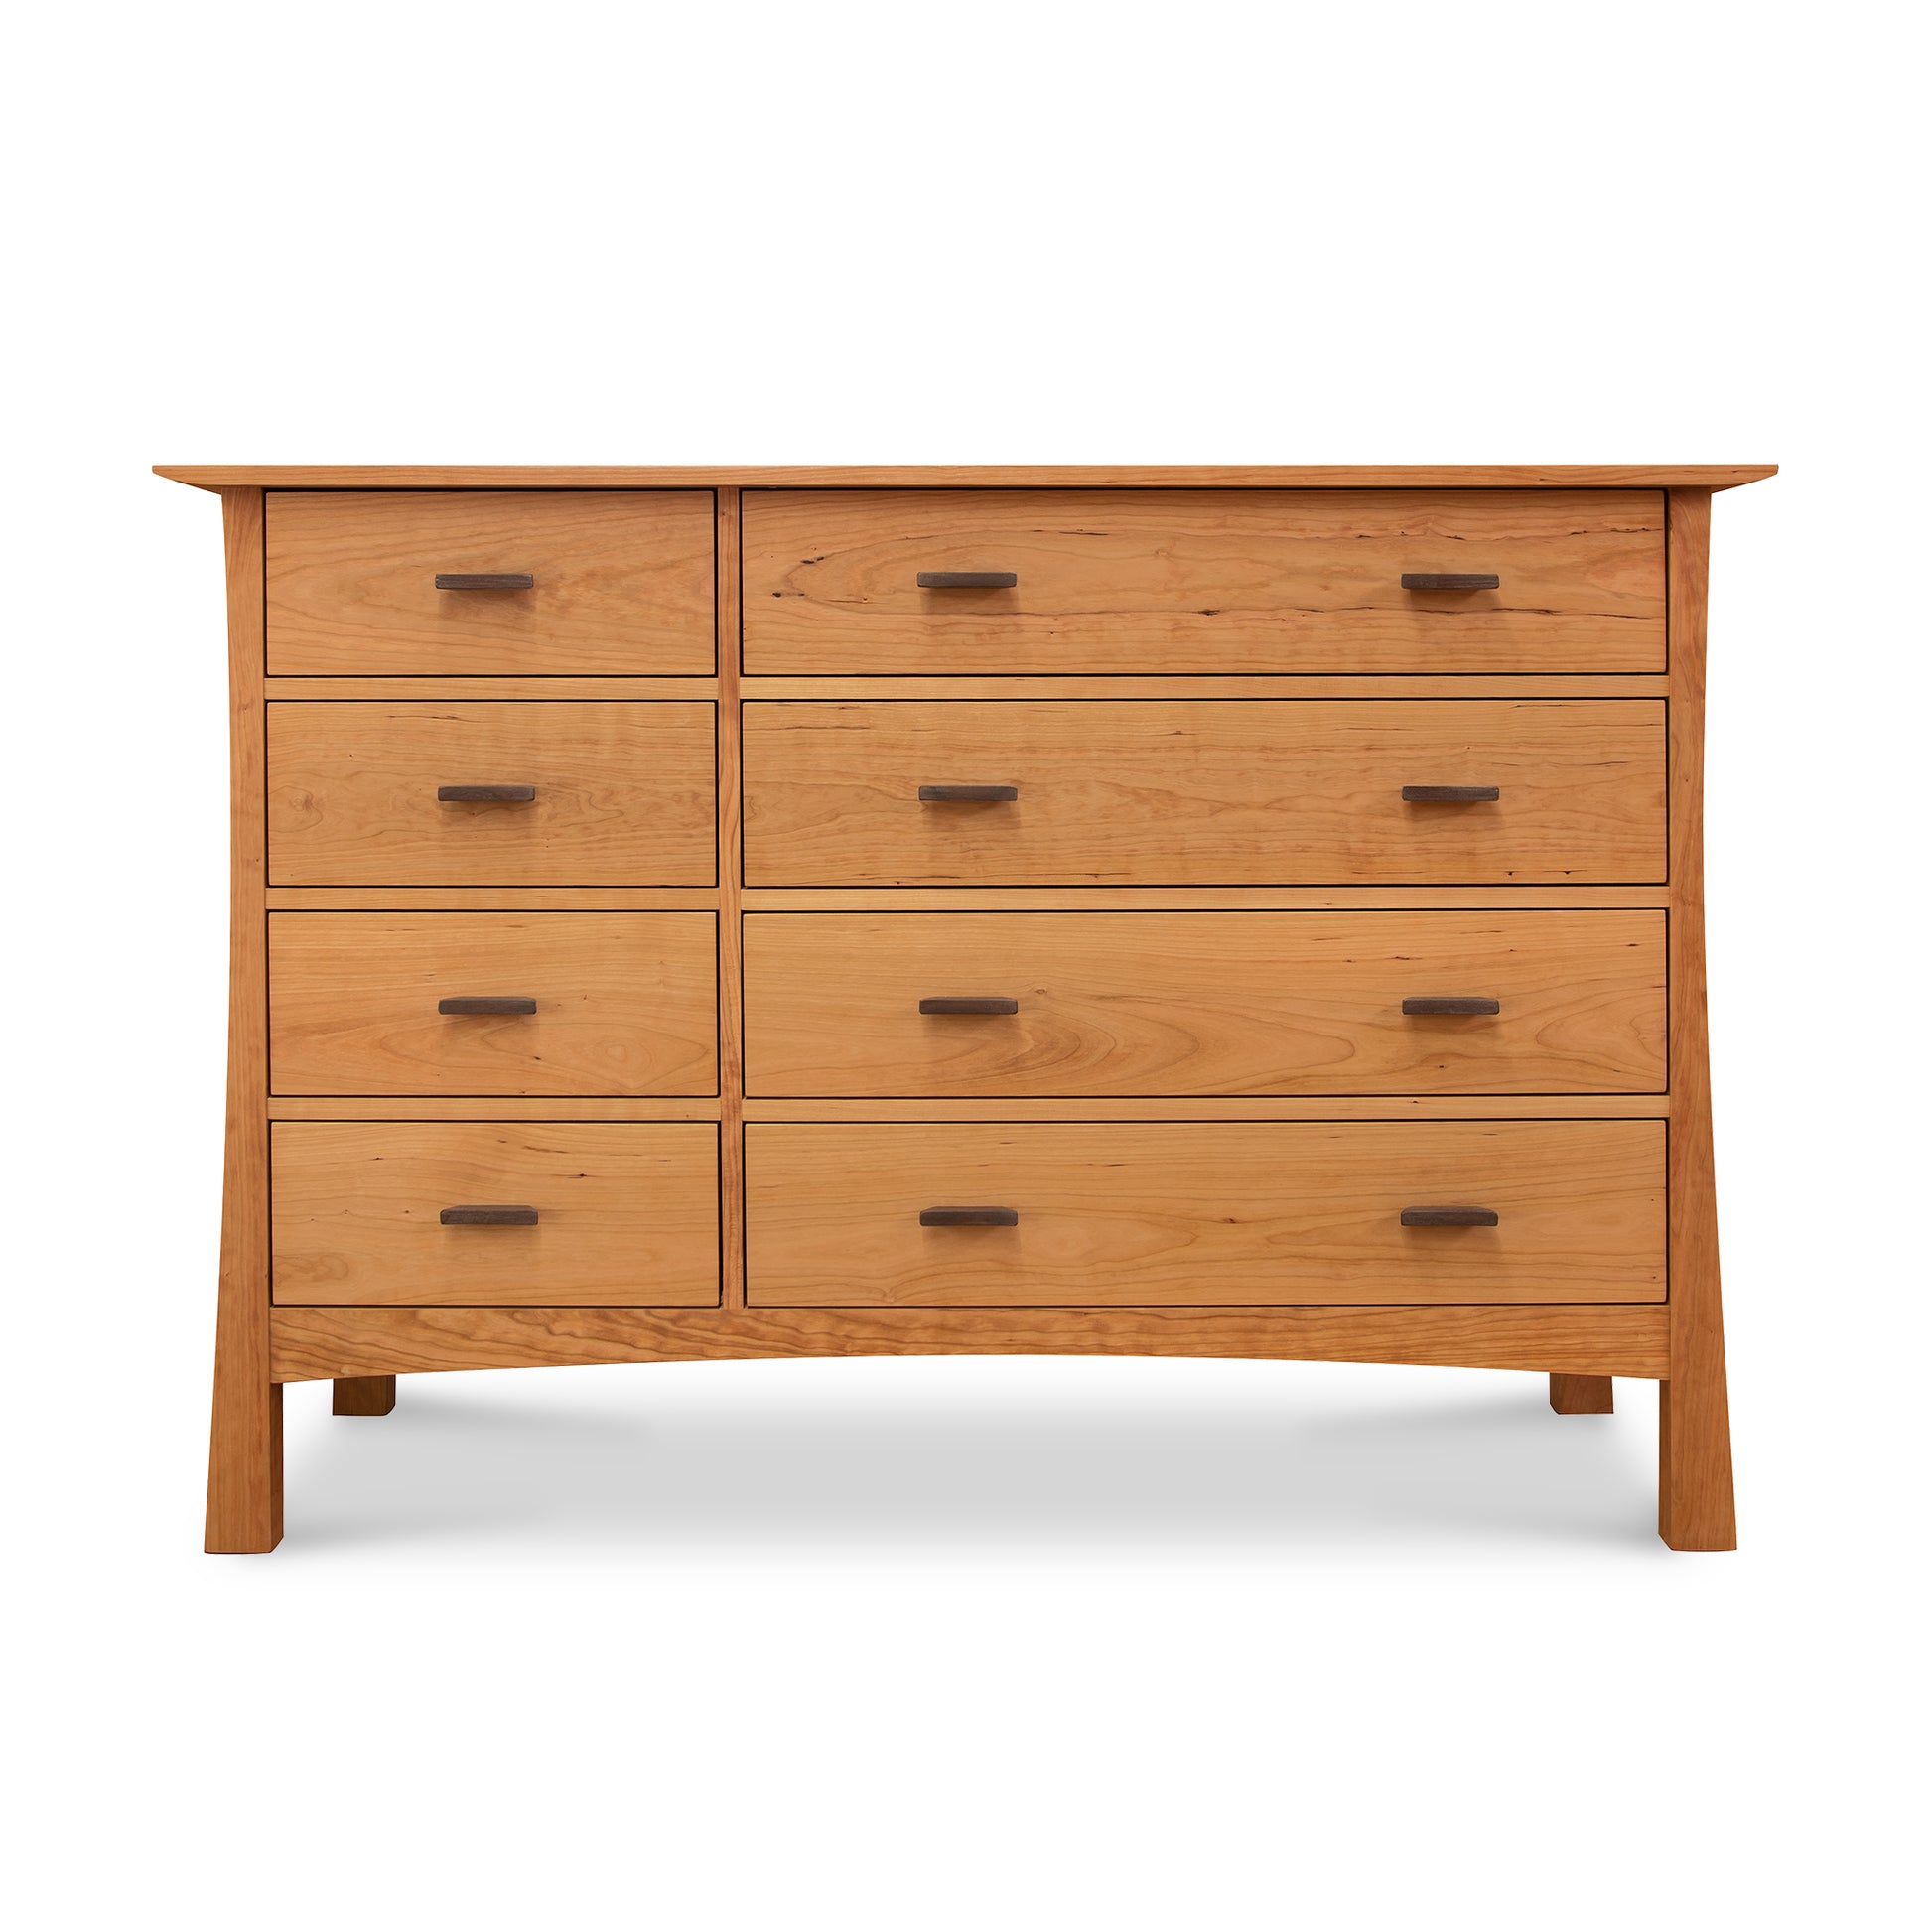 A Vermont Furniture Designs Contemporary Craftsman 8-Drawer Dresser crafted from natural cherry wood with six drawers and walnut drawer pulls against a white background.